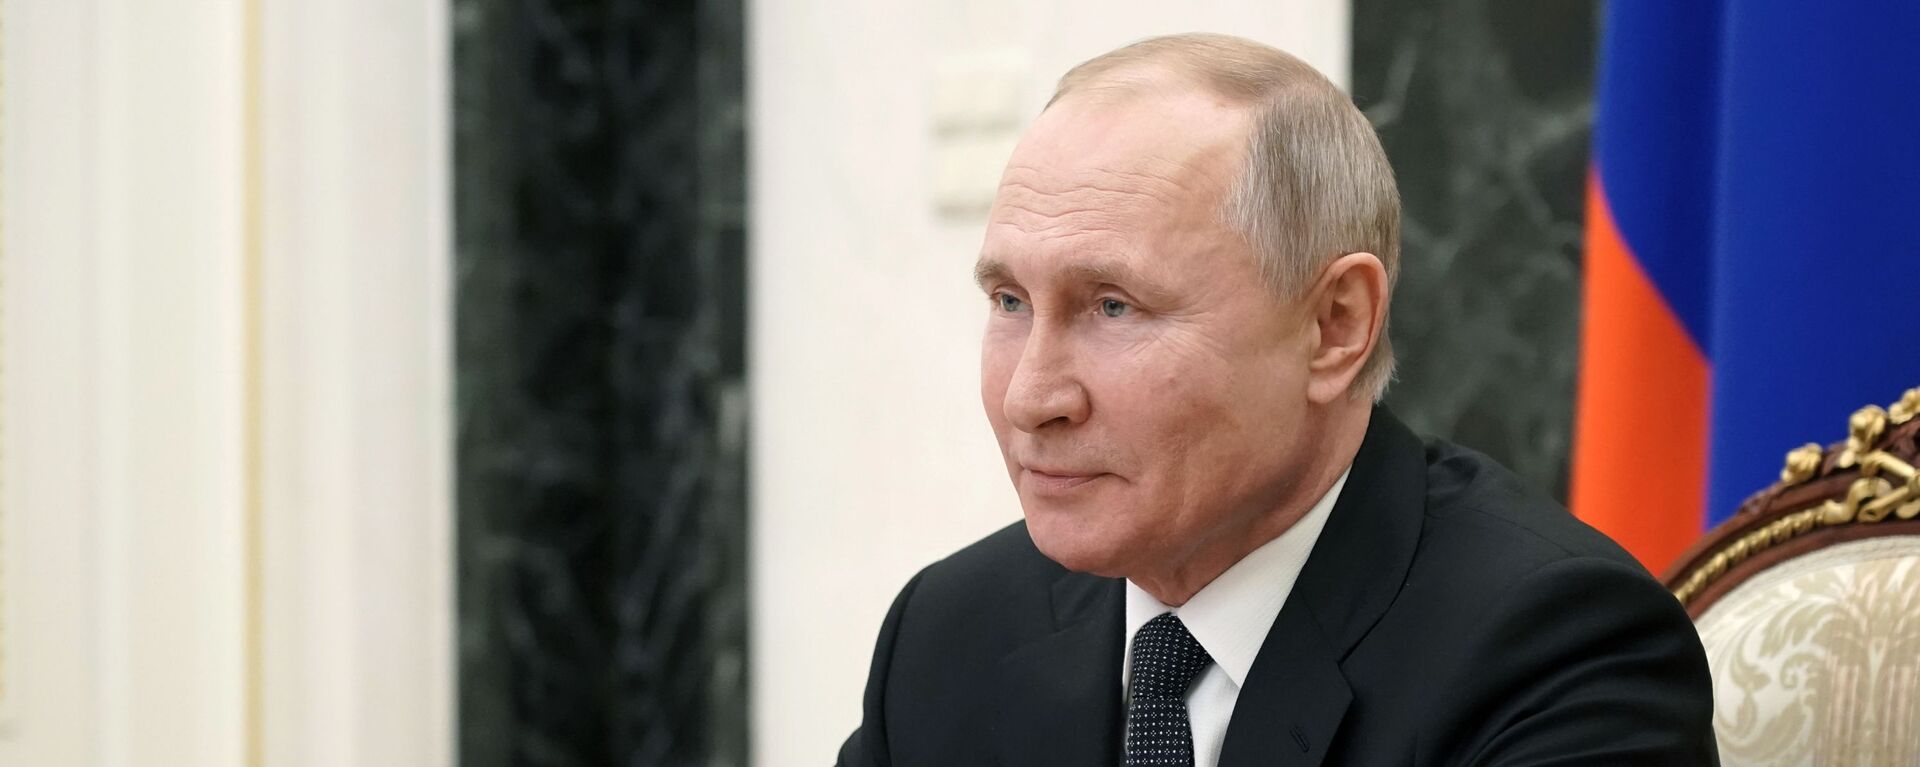 February 26, 2021. Russian President Vladimir Putin is holding an operational meeting with permanent members of the Russian Security Council via videoconference. - Sputnik International, 1920, 07.03.2021